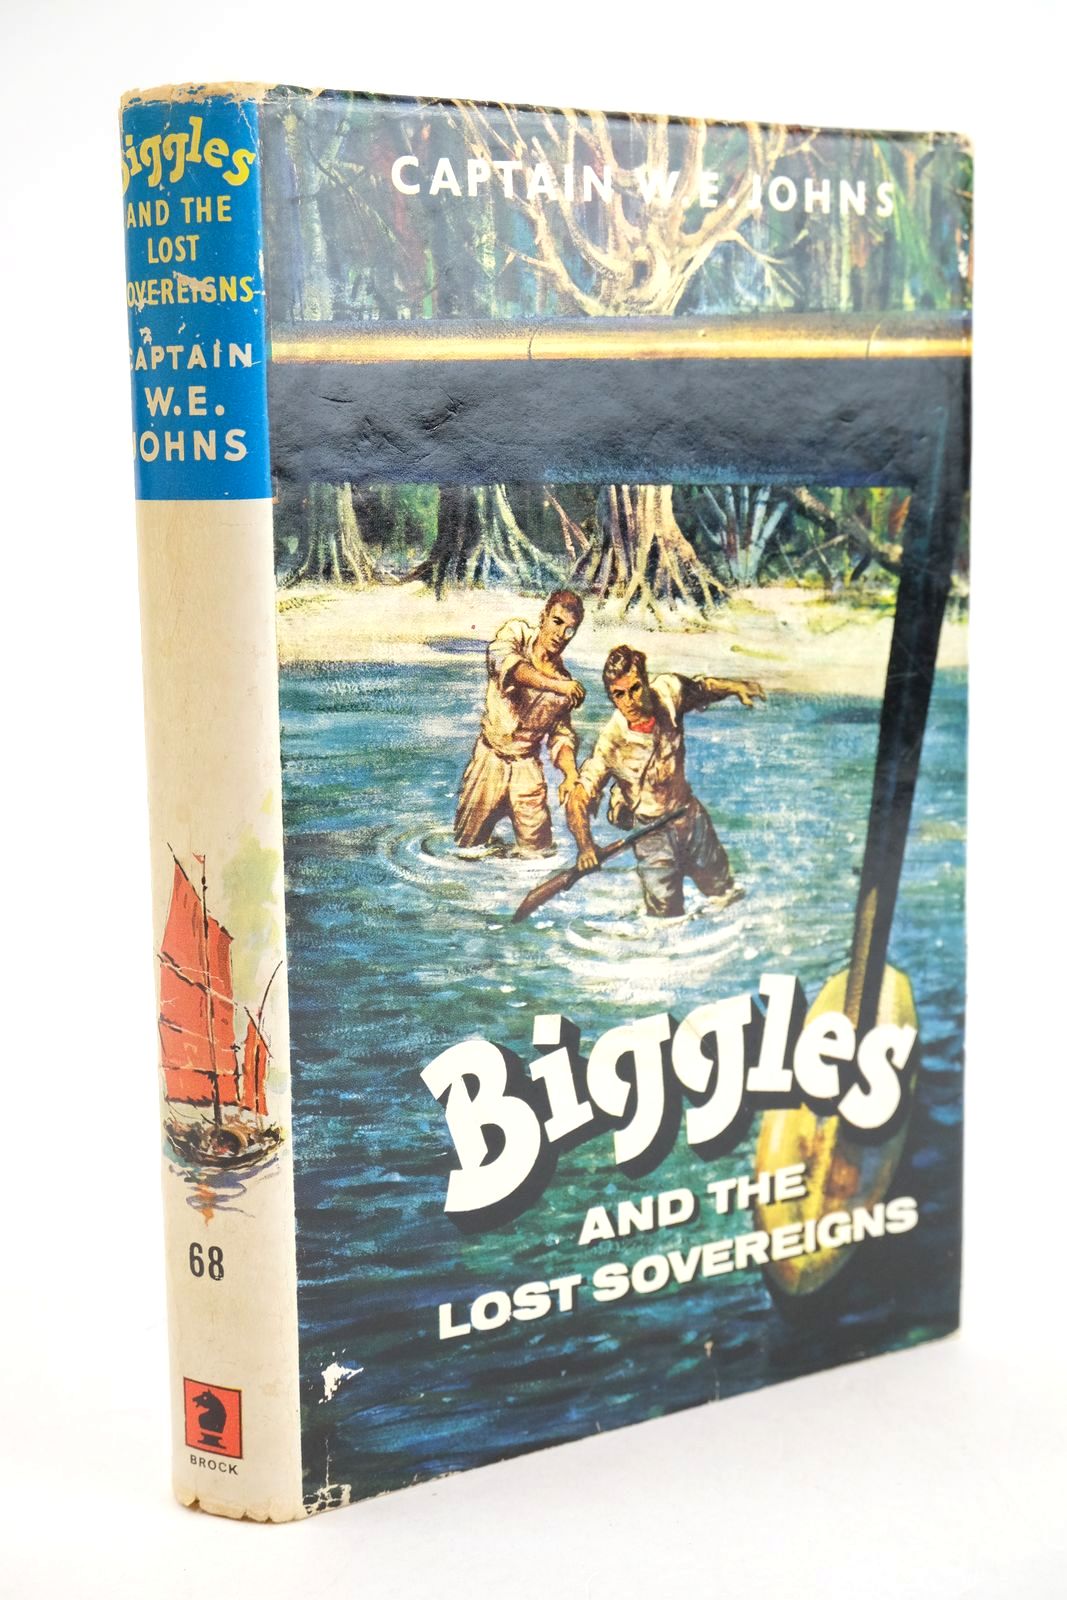 Photo of BIGGLES AND THE LOST SOVEREIGNS written by Johns, W.E. illustrated by Stead, Leslie published by Brockhampton Press (STOCK CODE: 1324417)  for sale by Stella & Rose's Books